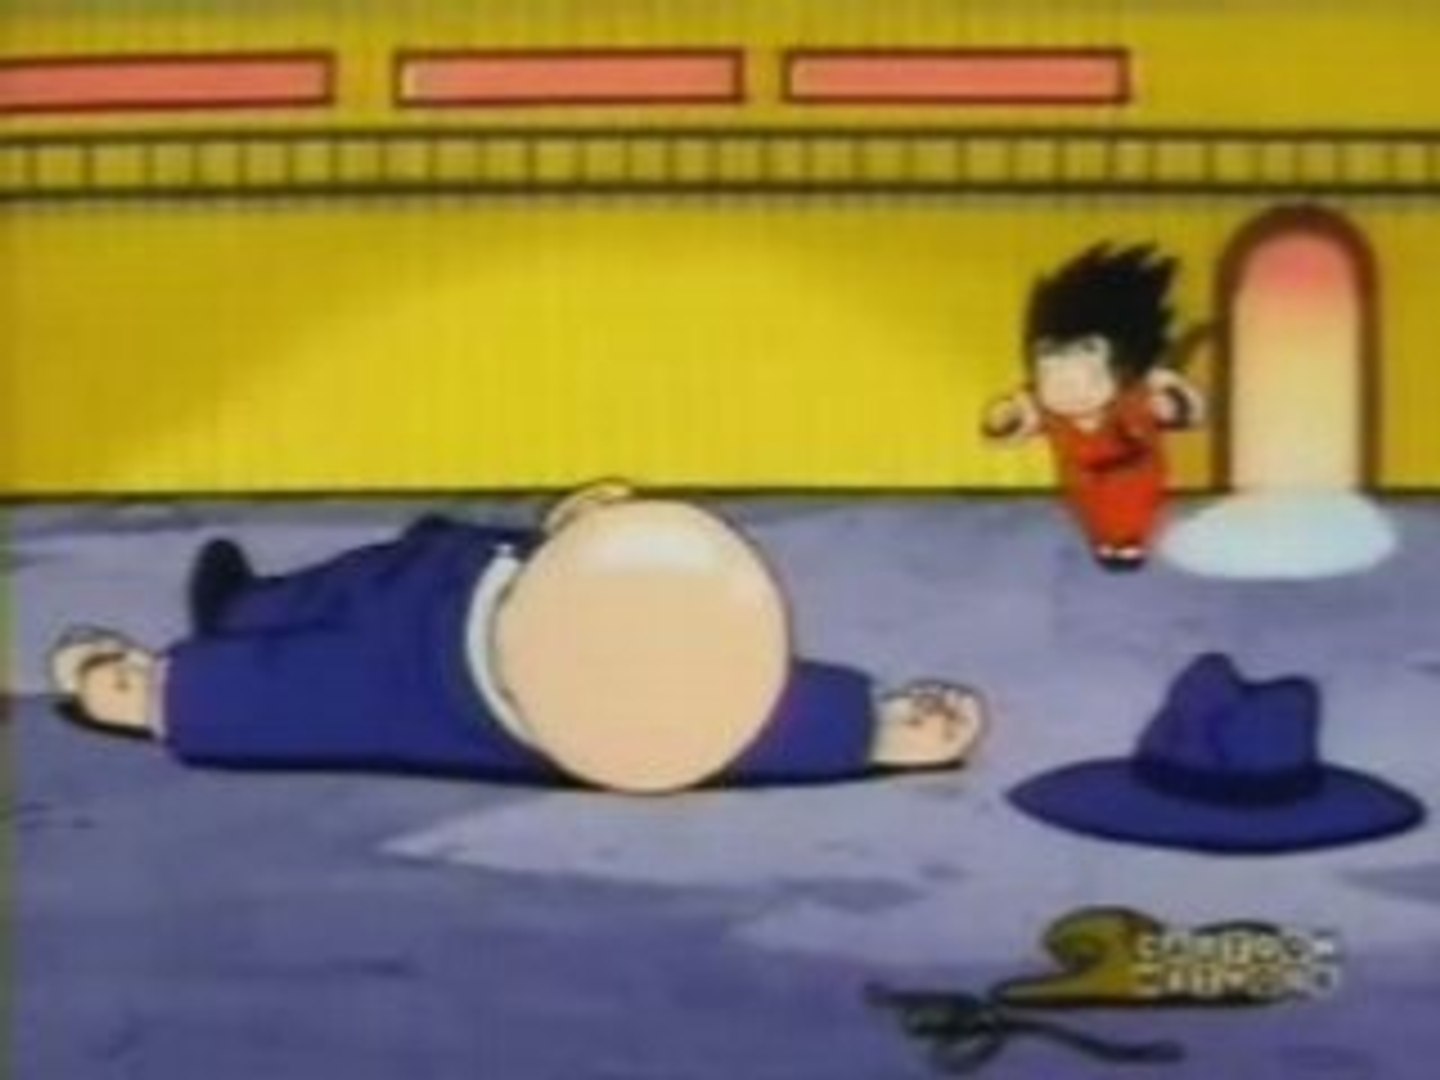 Krillin's Death (Bruce Faulconer) - video Dailymotion